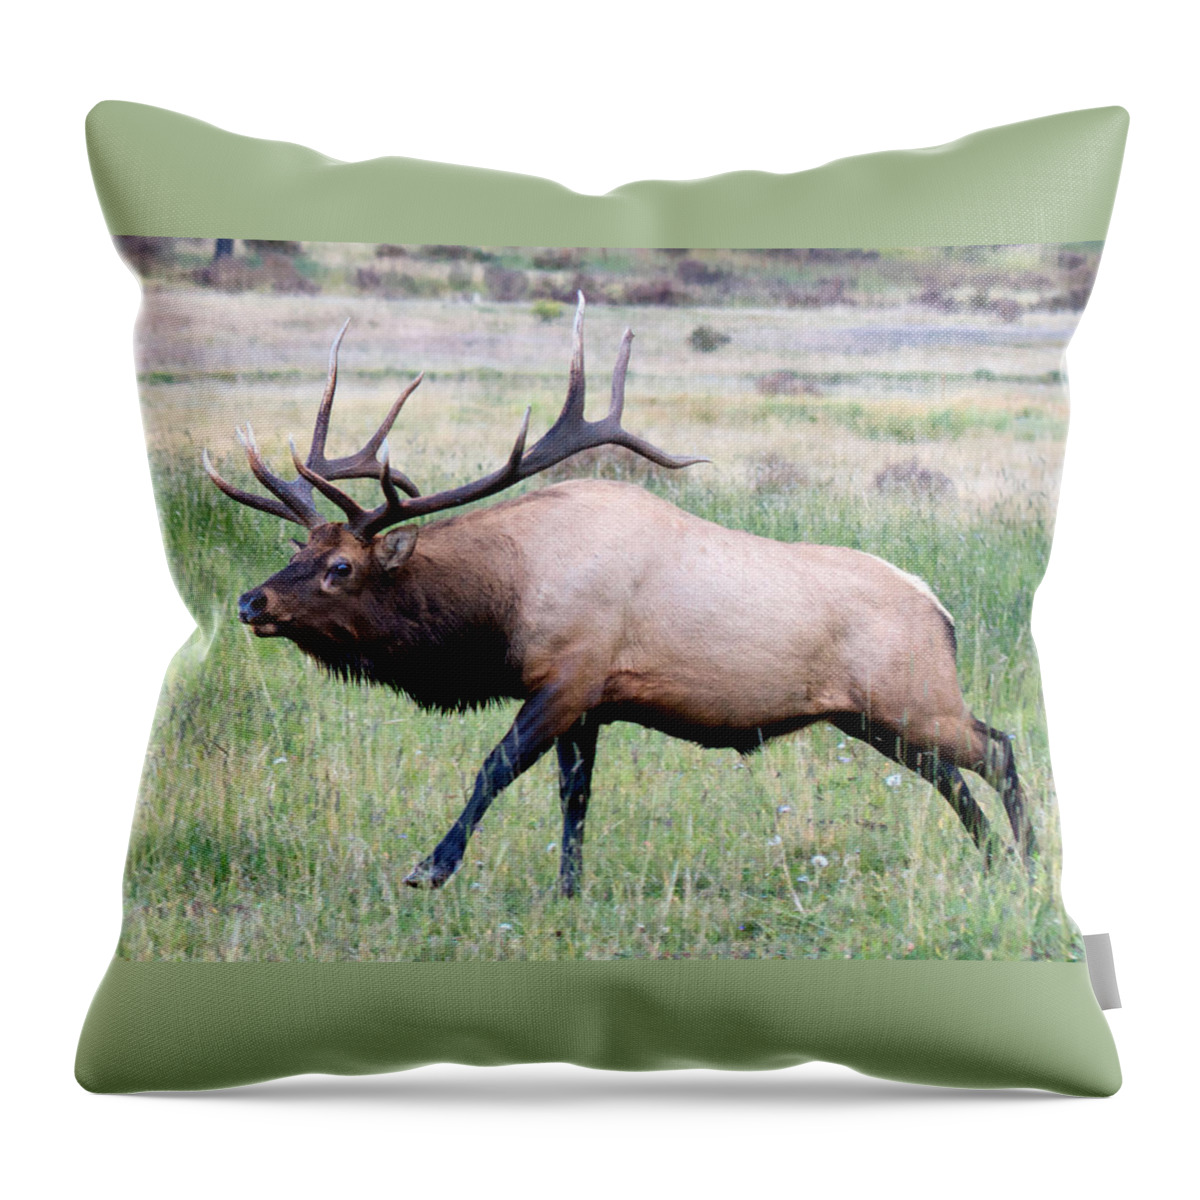 Horizontal Throw Pillow featuring the photograph Running Bull Elk by OLena Art by Lena Owens - Vibrant DESIGN